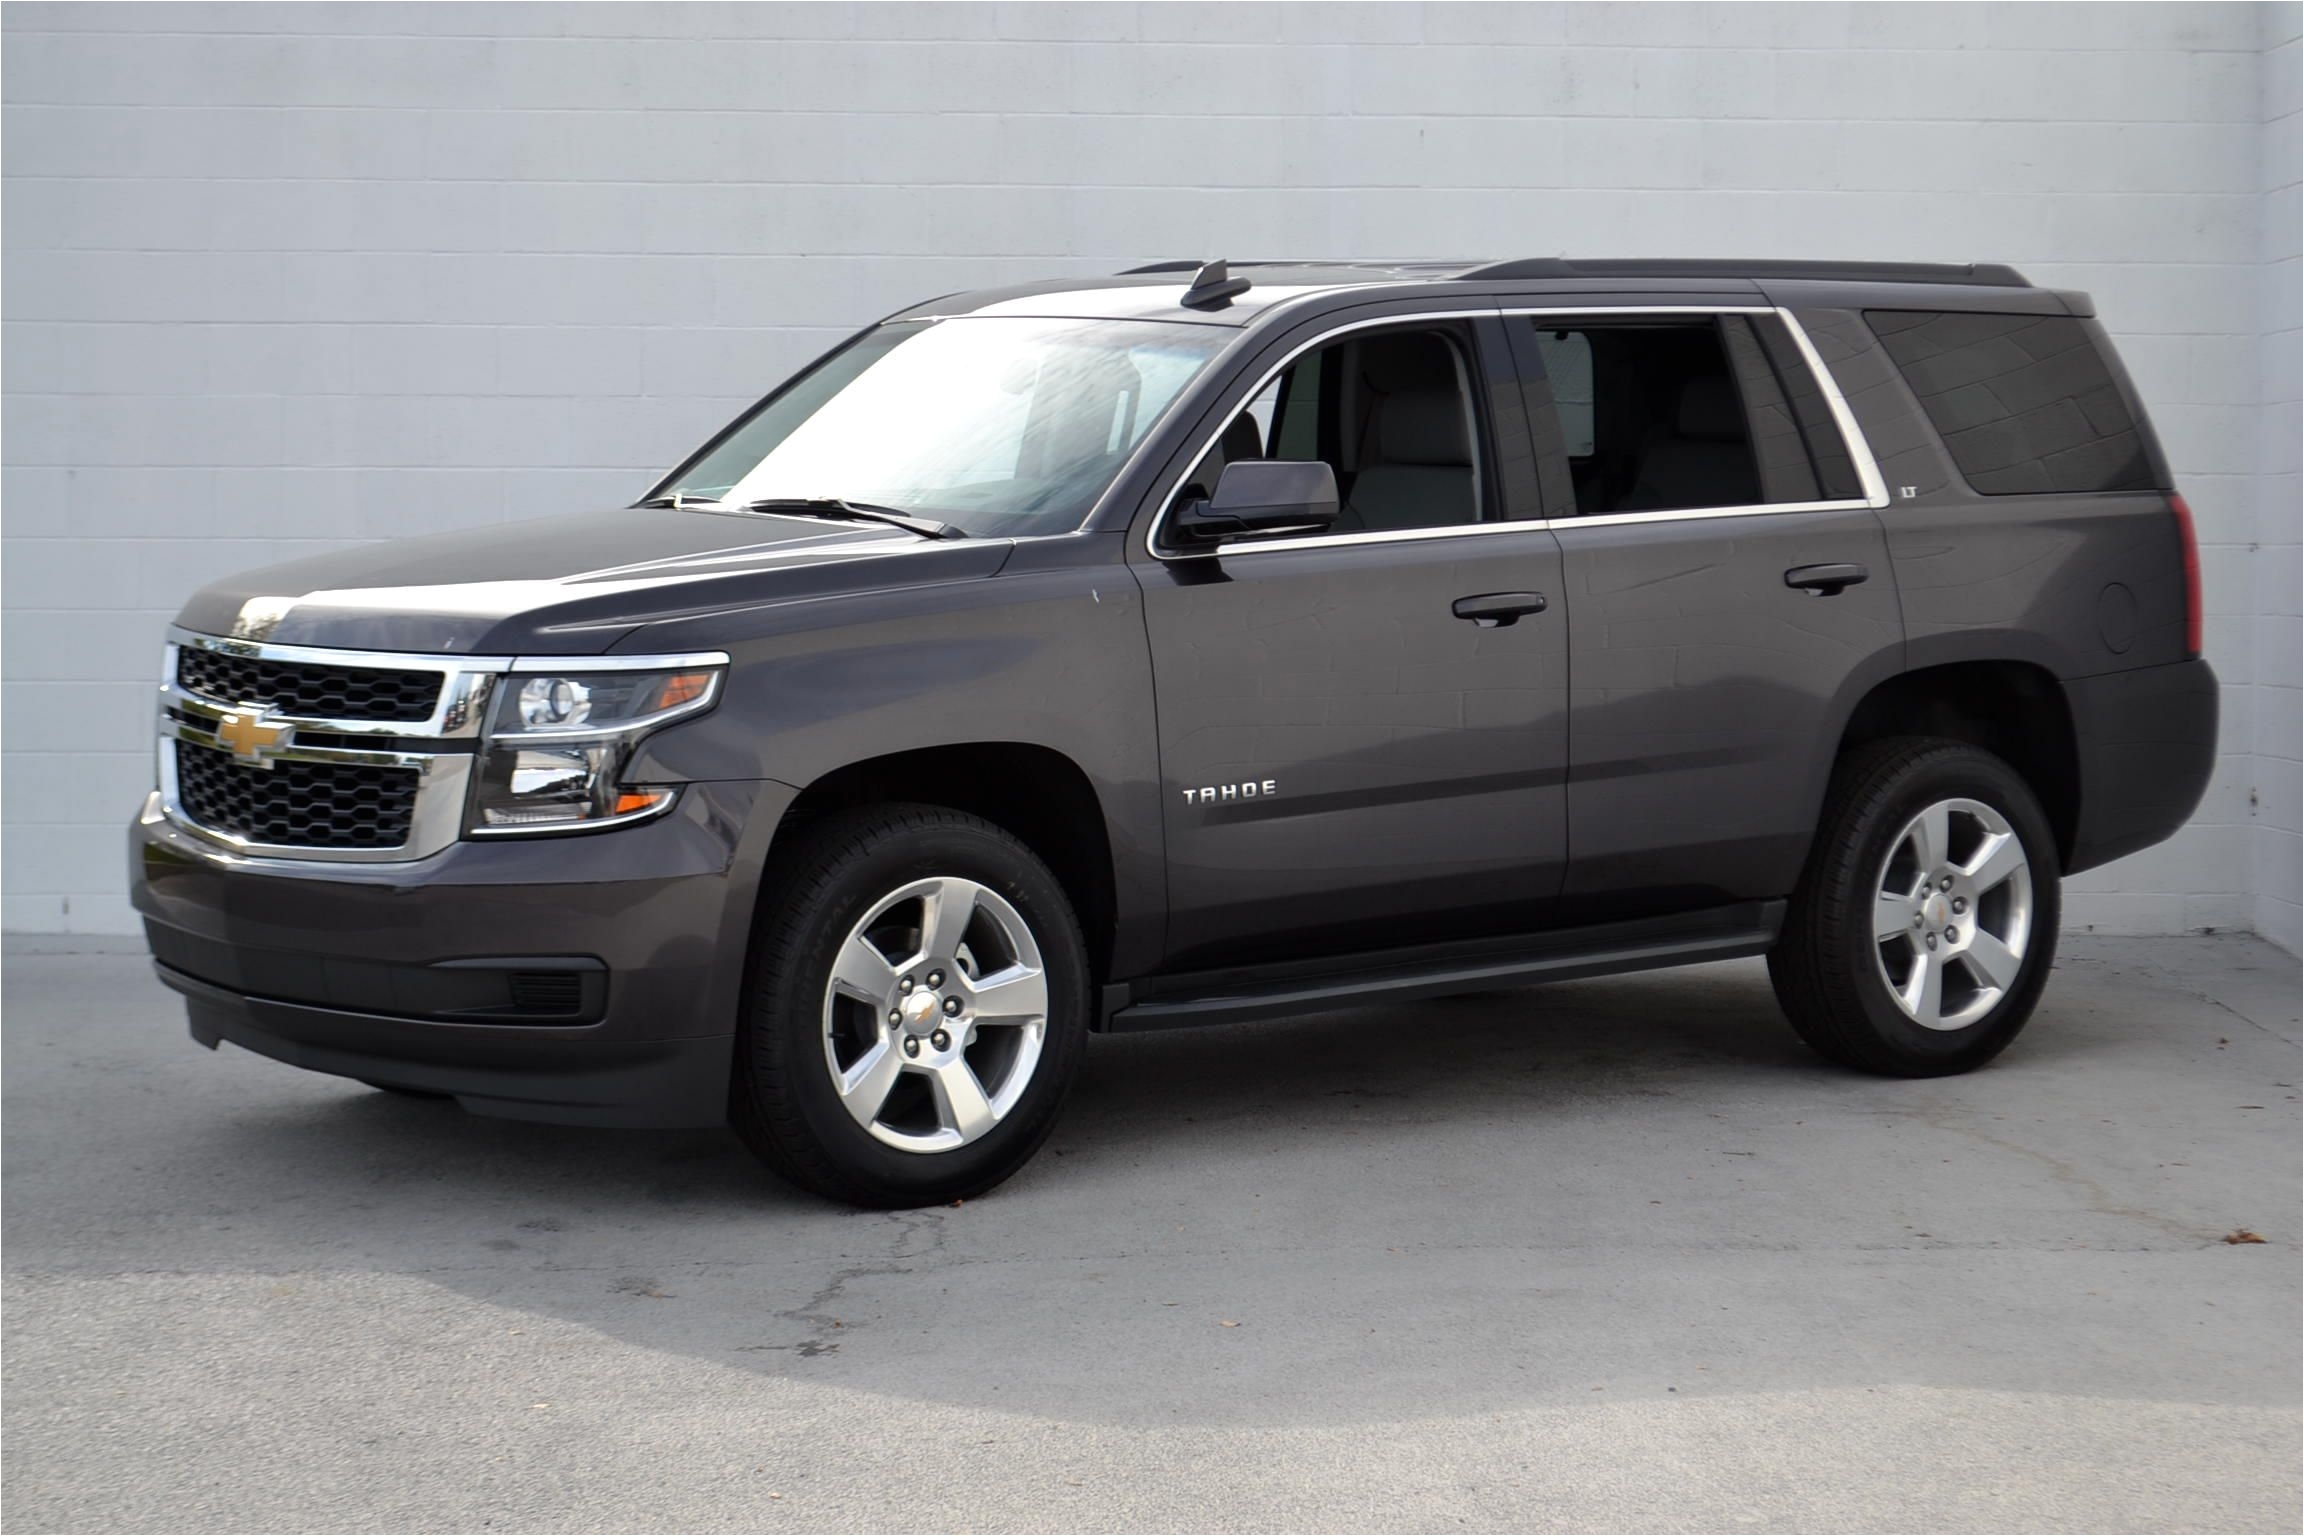 2015 Chevy Tahoe Interior Color Options 2016 Chevy Tahoe New 2016 Chevrolet Tahoe Lt for Sale In Columbia